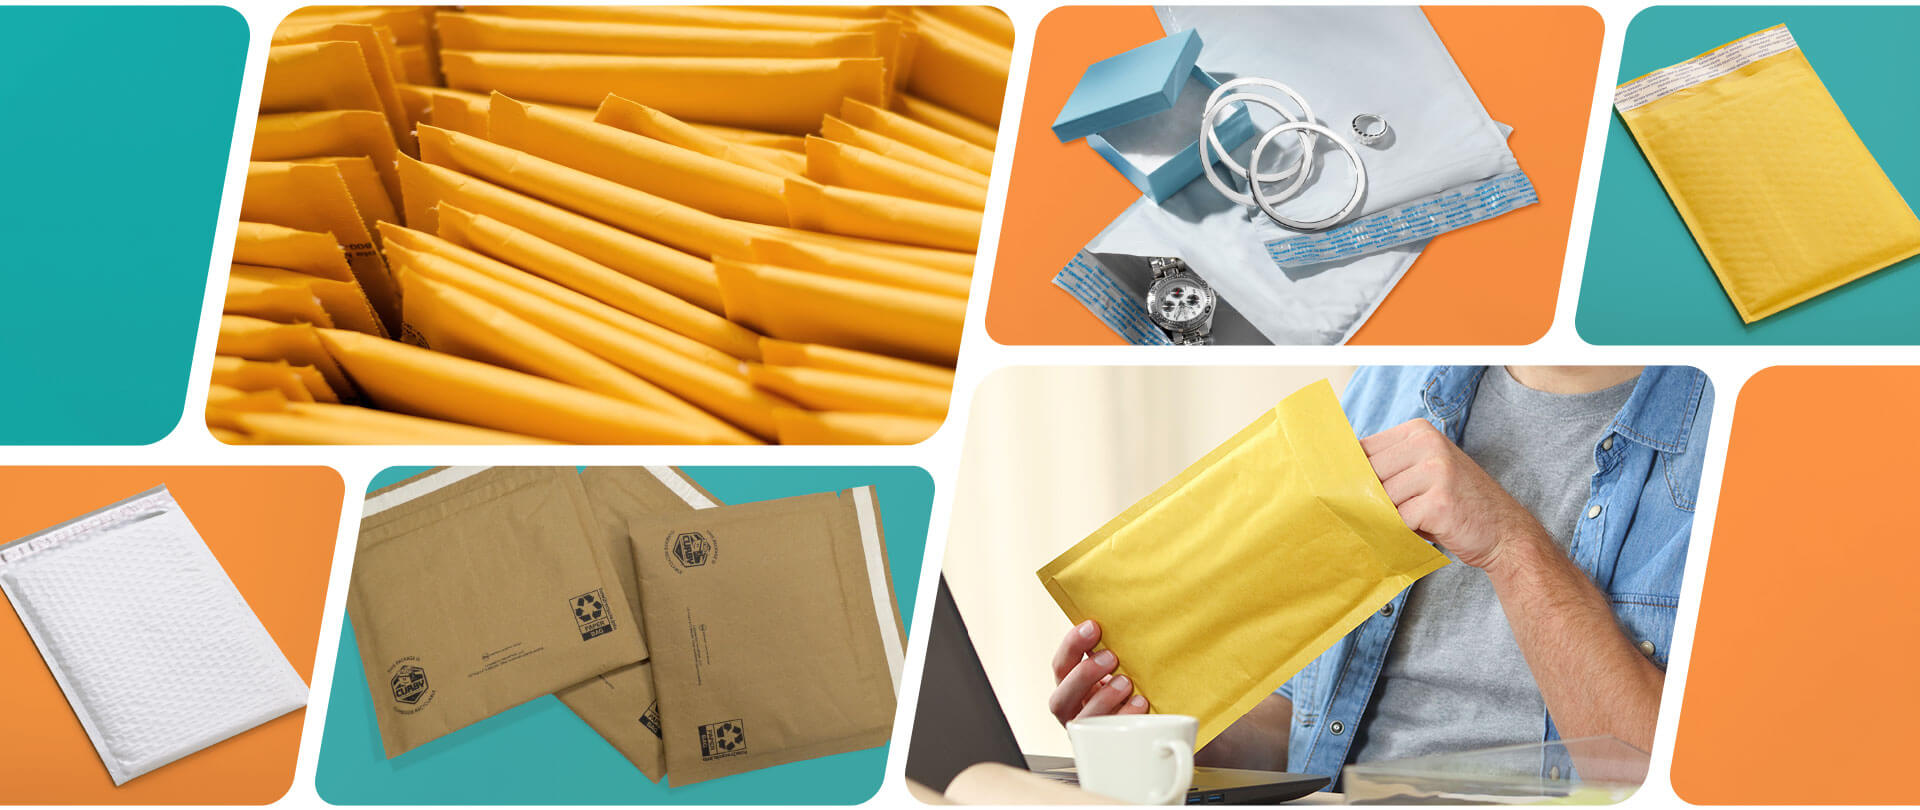 Bubble Mailers, Eco-friendly Mailers